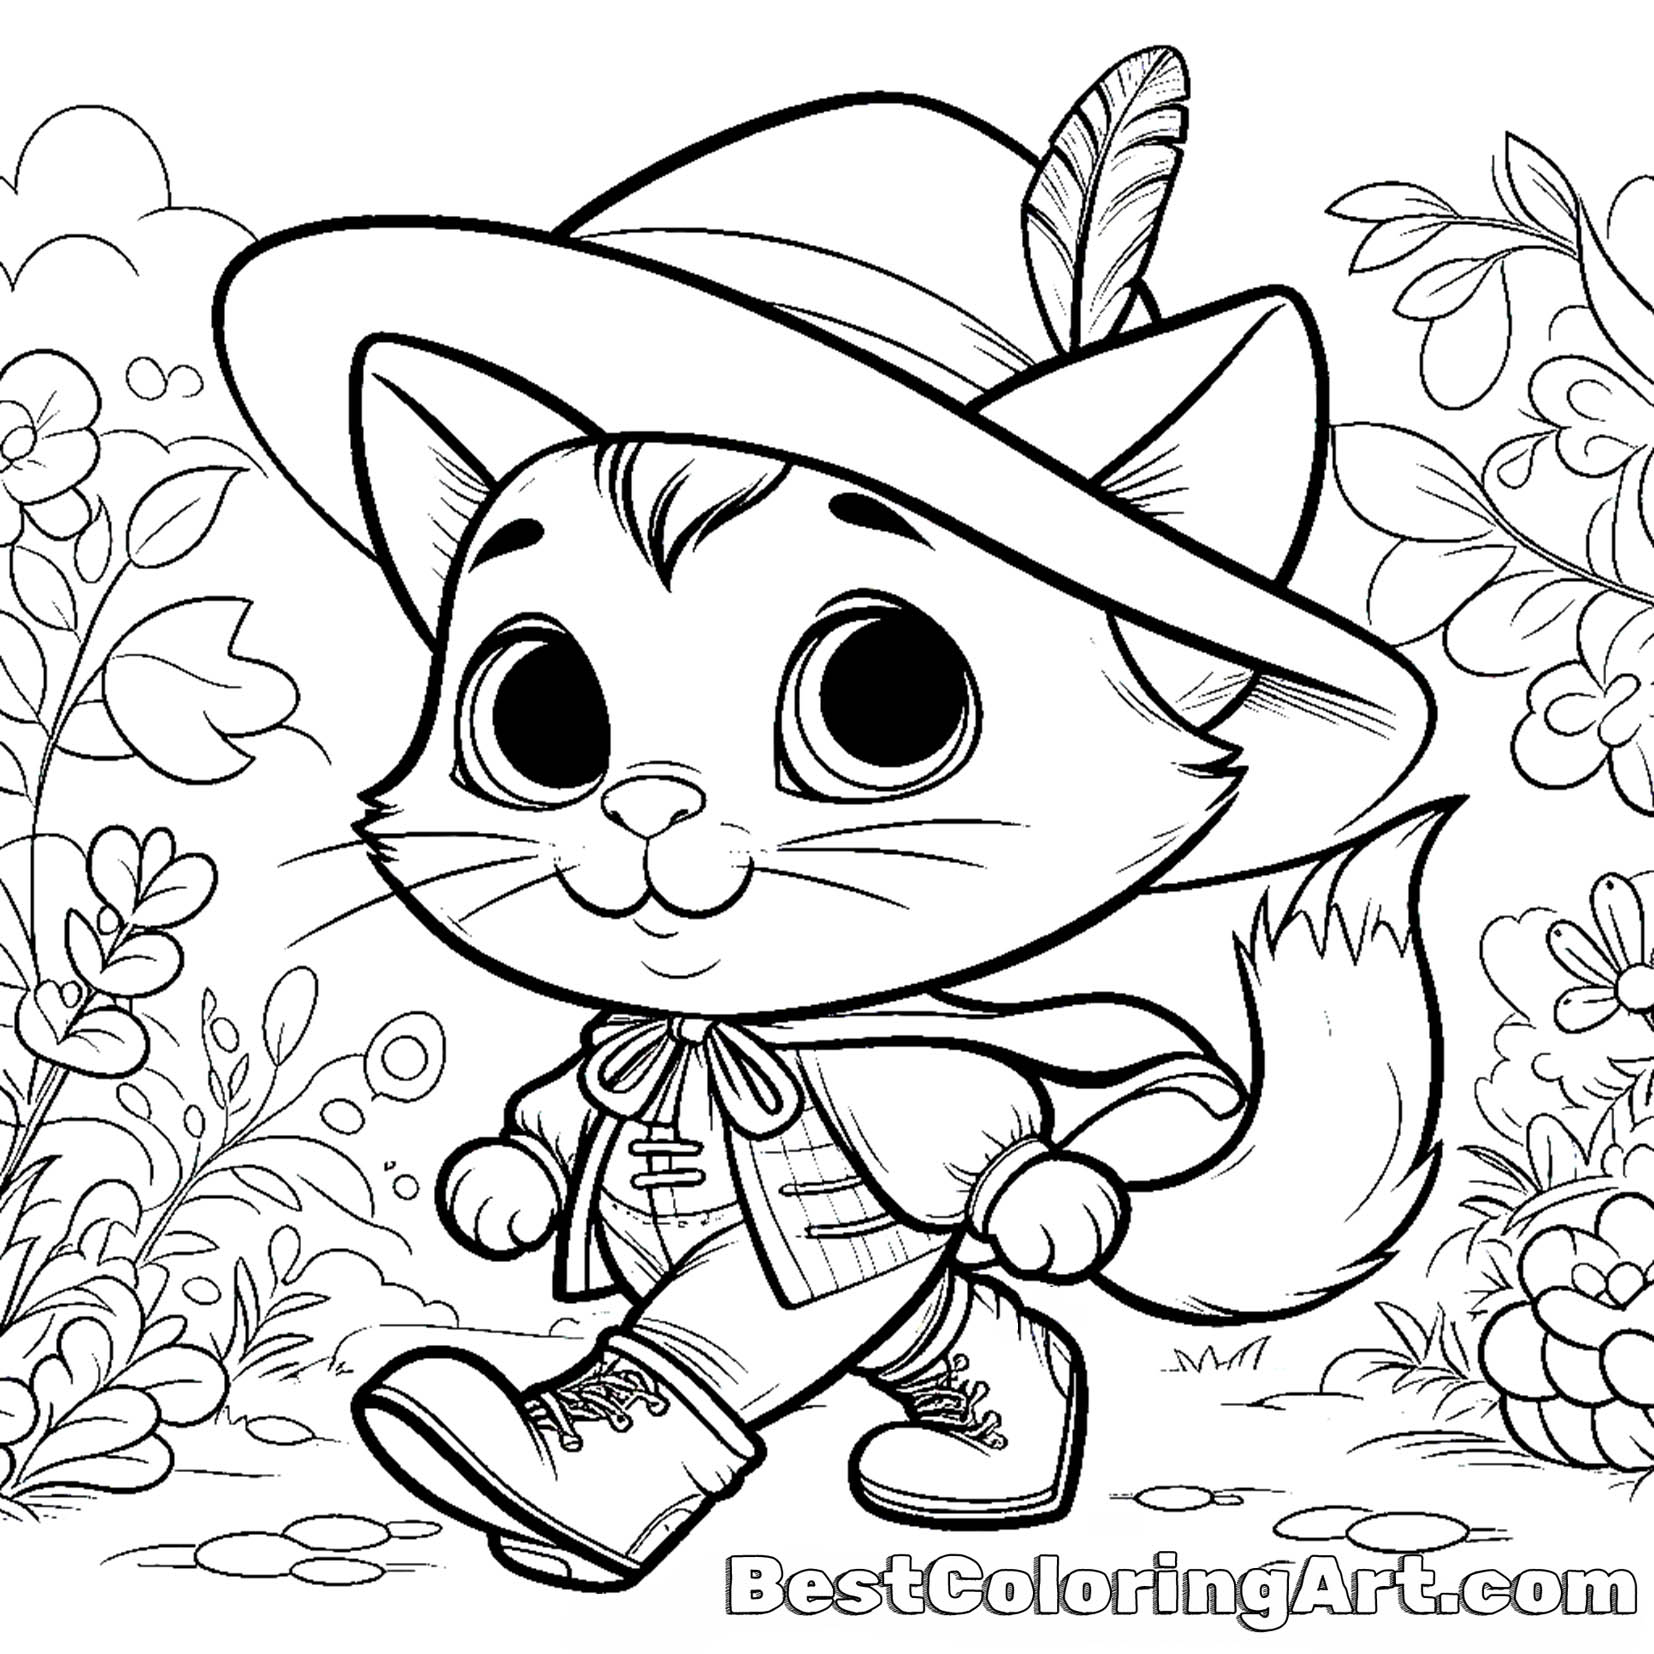 Puss in boots coloring page